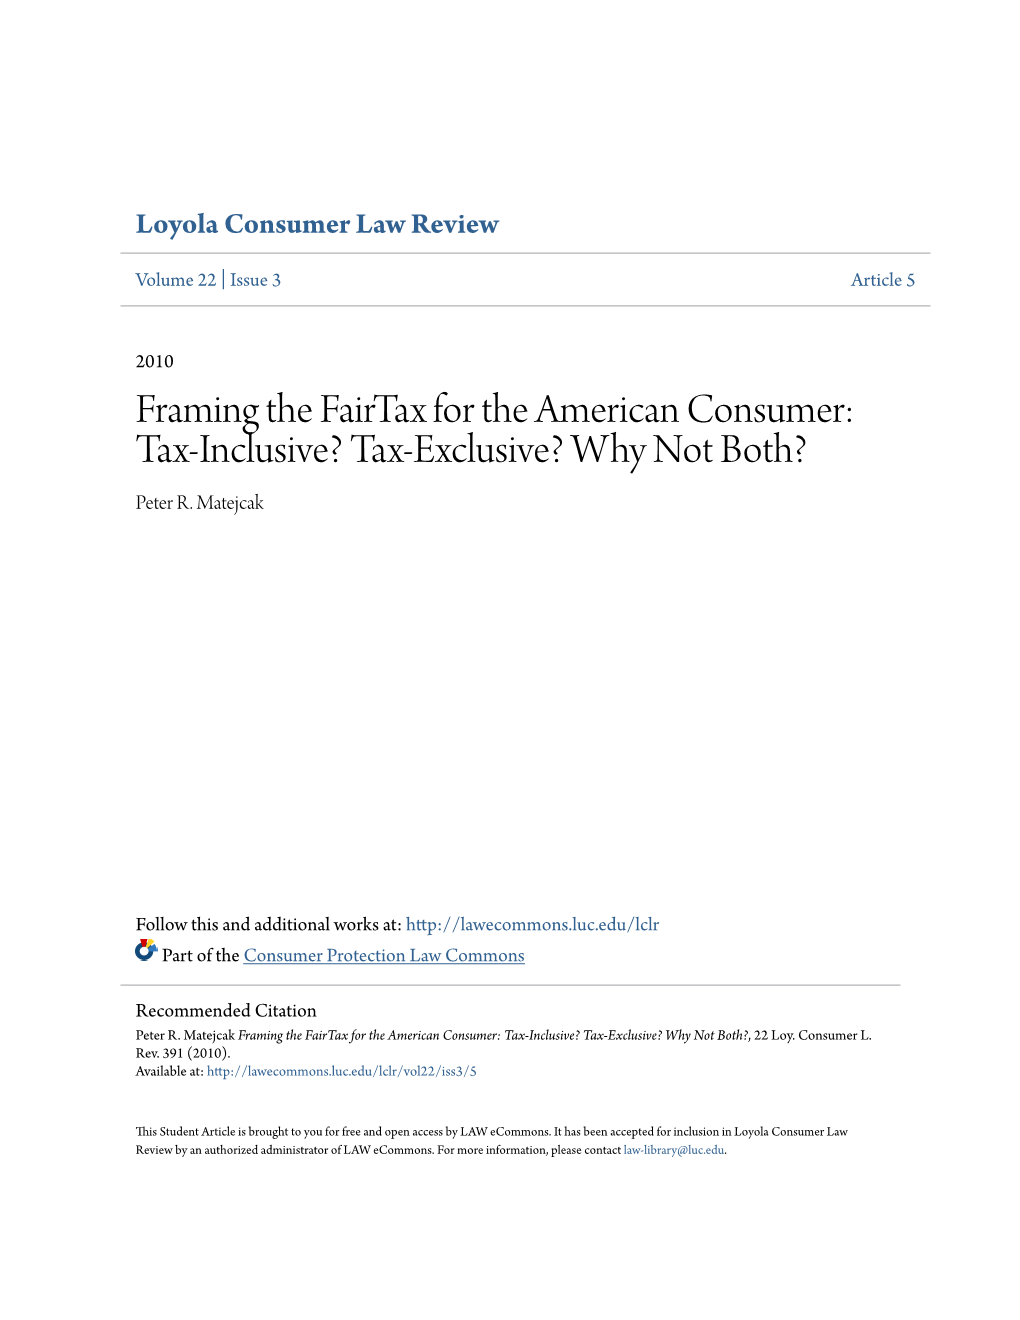 Framing the Fairtax for the American Consumer: Tax-Inclusive? Tax-Exclusive? Why Not Both? Peter R